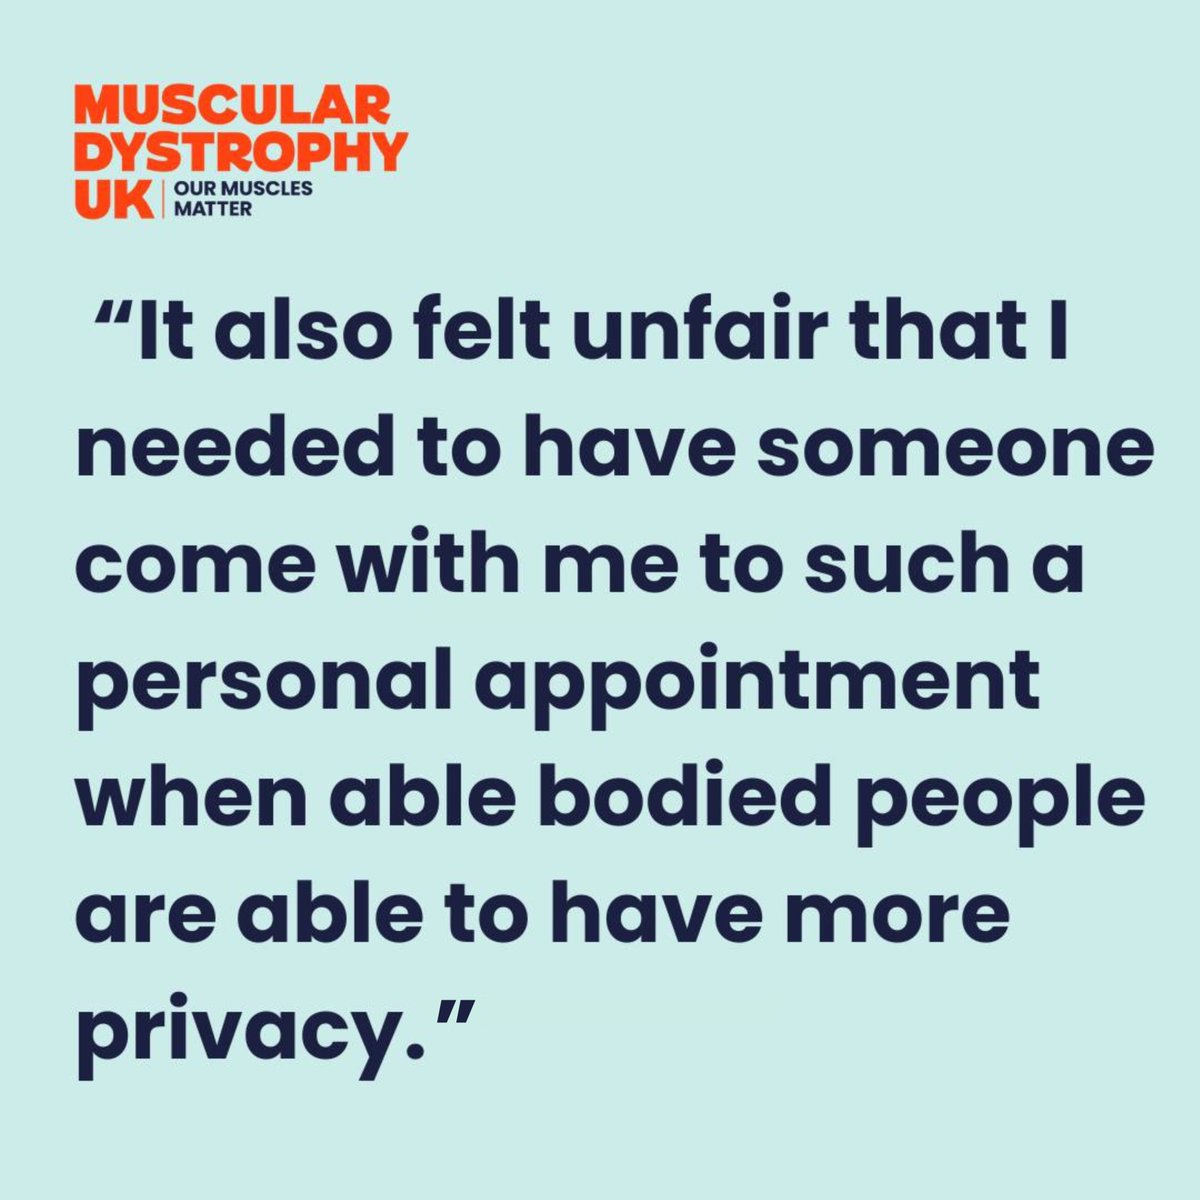 Lauren and Rebecca are both young women who have muscular dystrophy and are full time wheelchair users. For #WorldHealthDay, they share their experiences of accessing reproductive and sexual healthcare and reflect on prejudices they’ve faced. rb.gy/mwj9p9